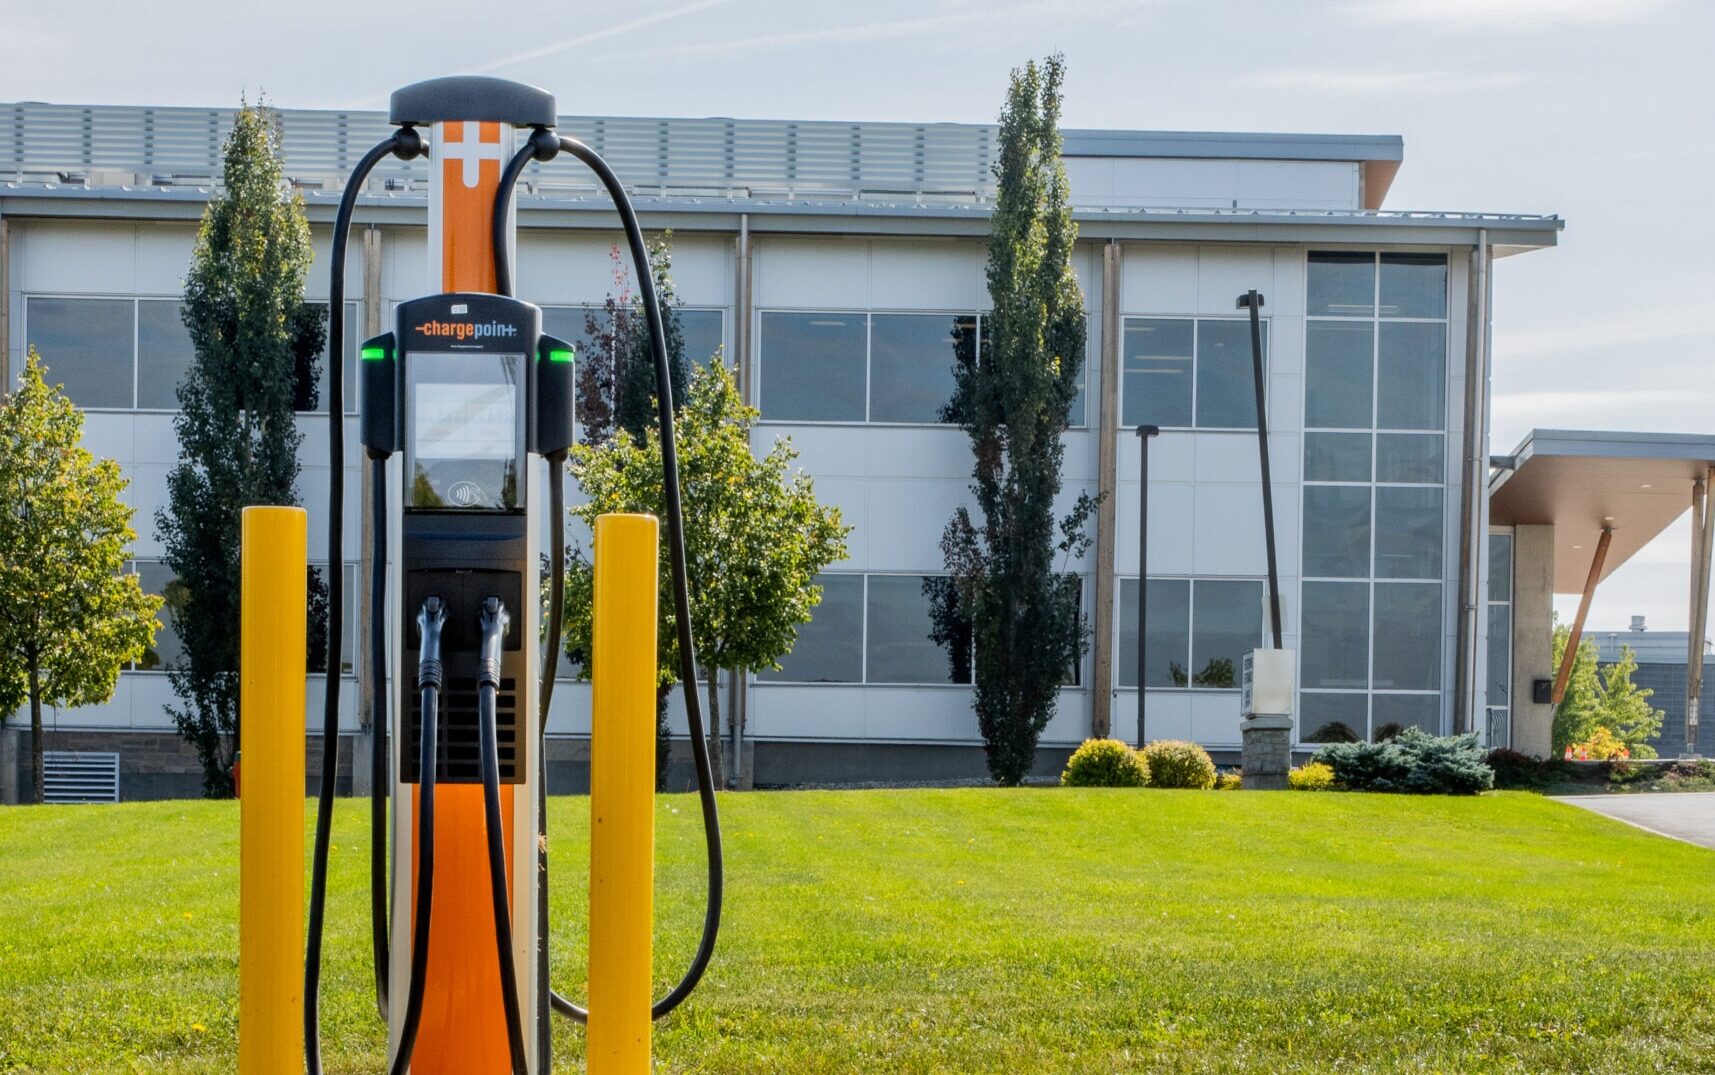 Chargepoint electric vehicle charger in front of a two-story steel and glass commercial building with a grass lawn, decorative trees and shrubs in Guelph Ontario.